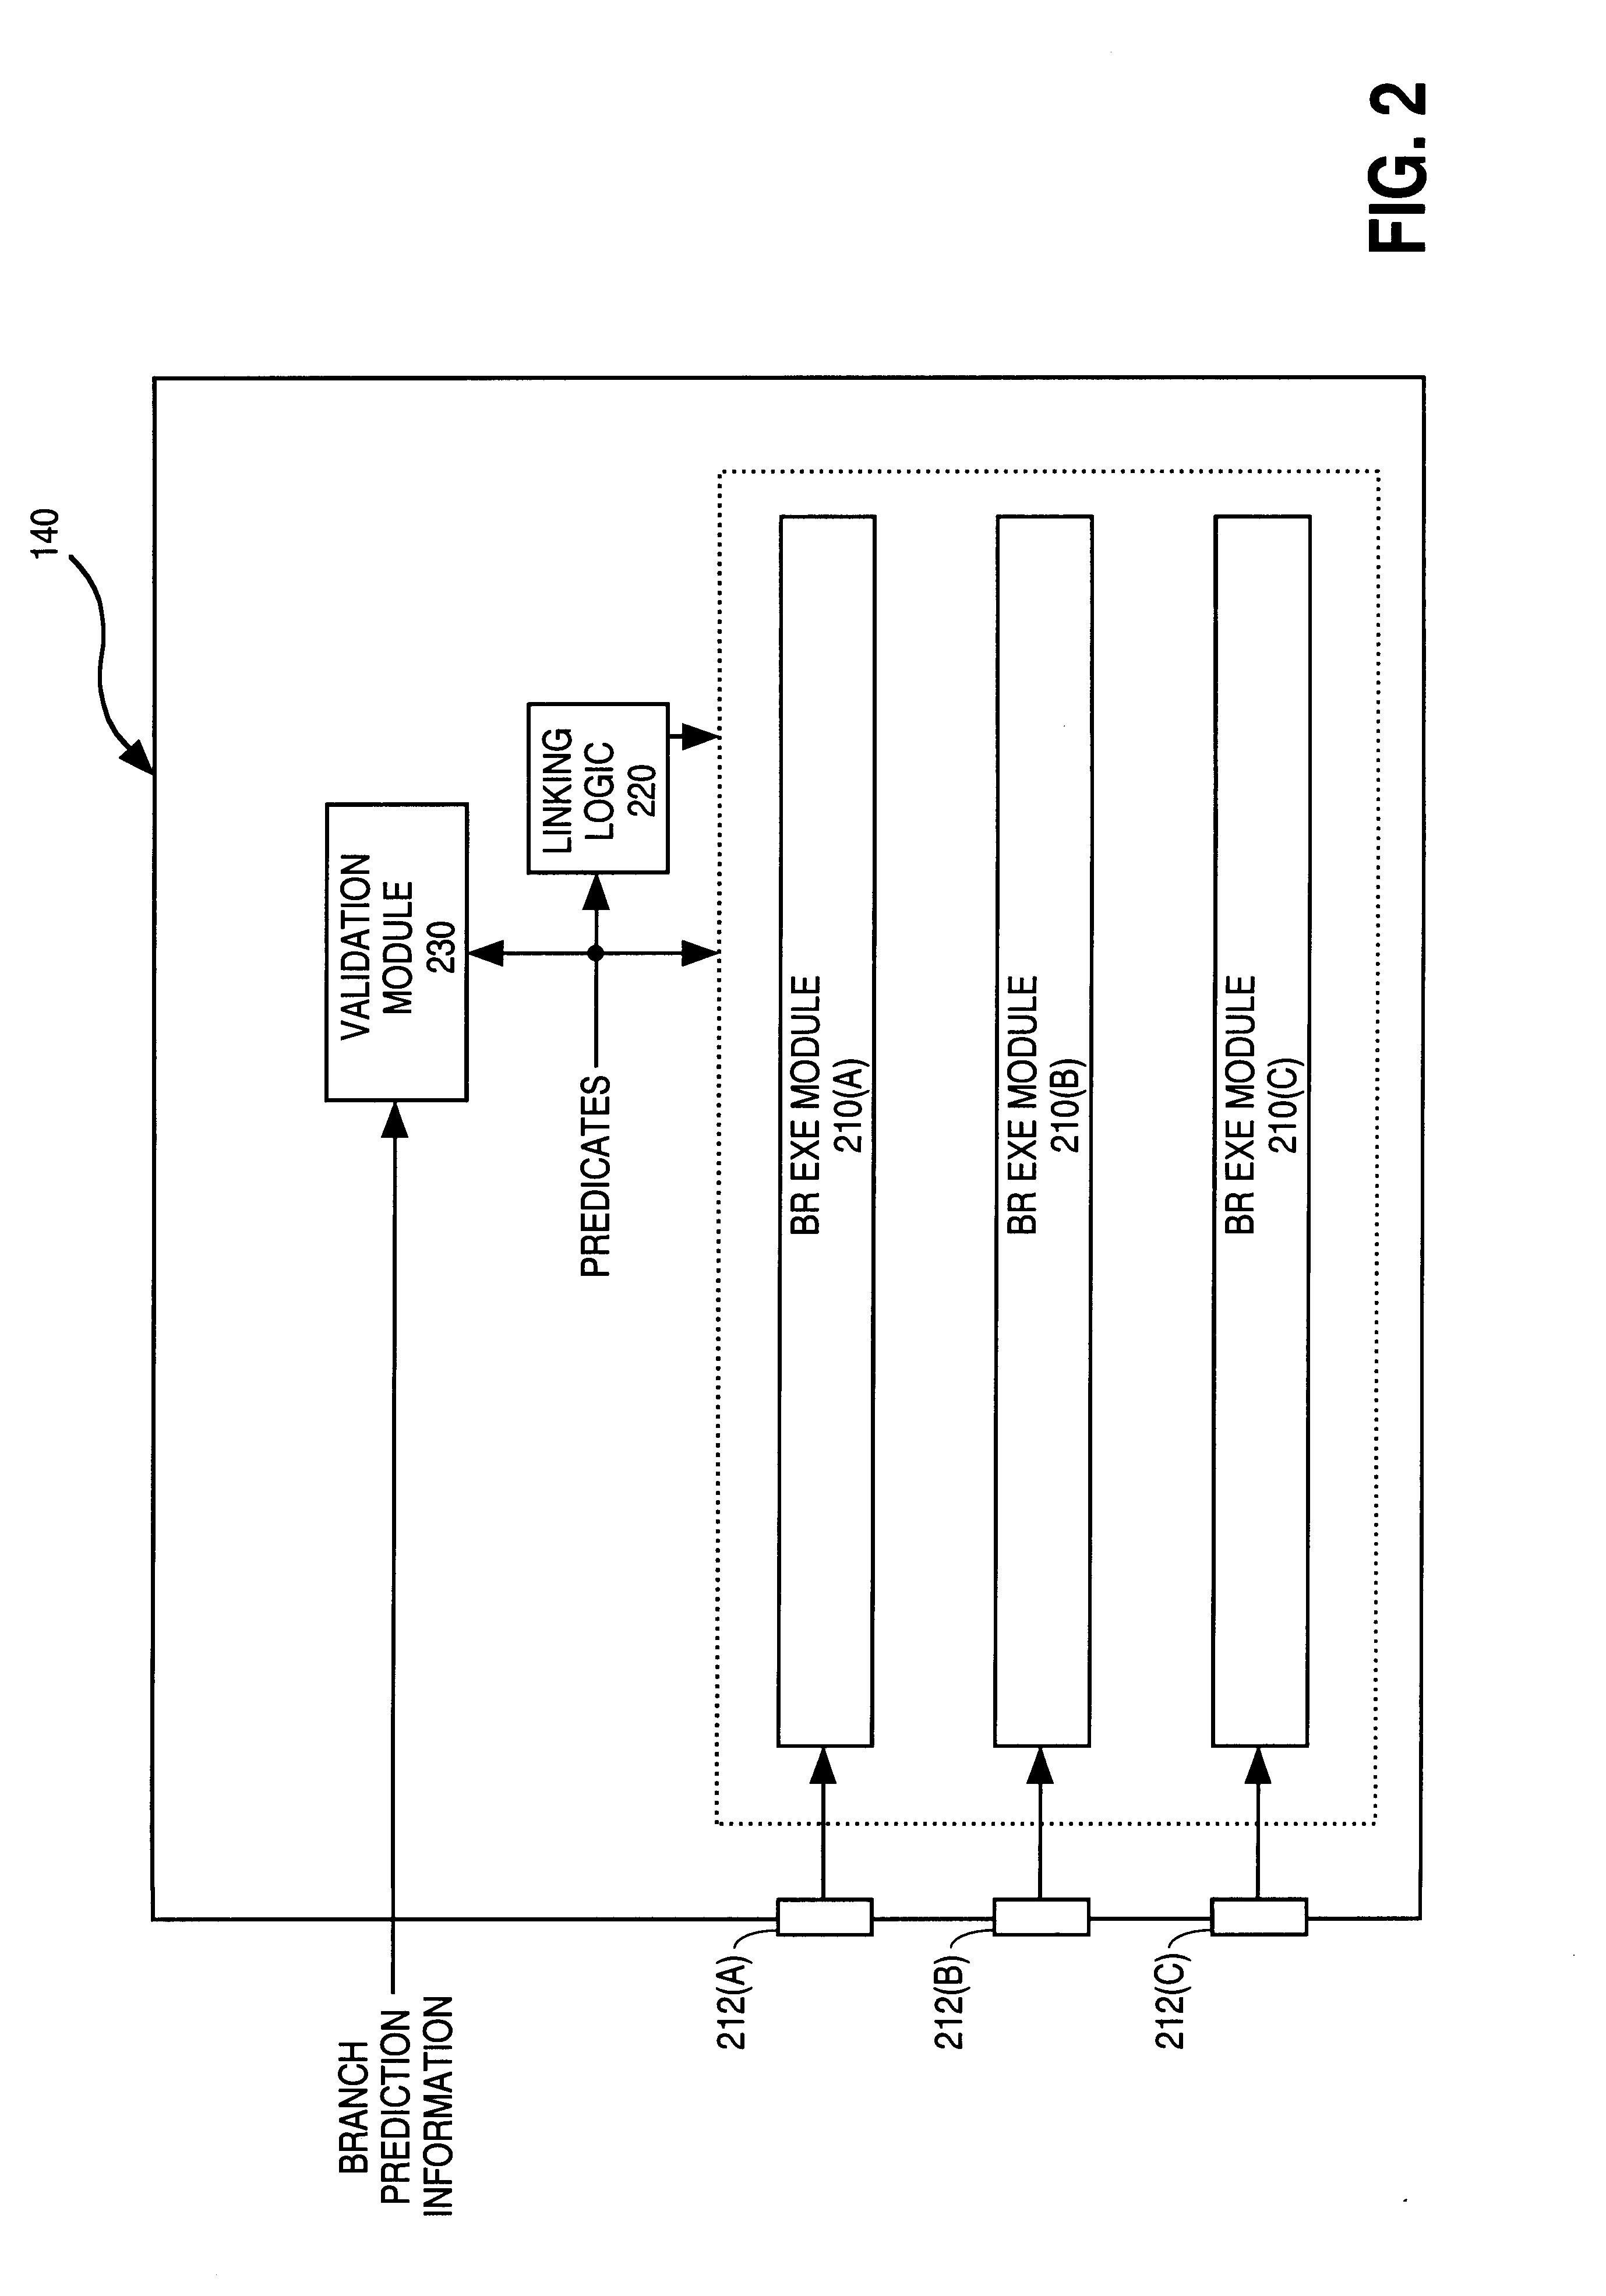 System for processing a cluster of instructions where the instructions are issued to the execution units having a priority order according to a template associated with the cluster of instructions